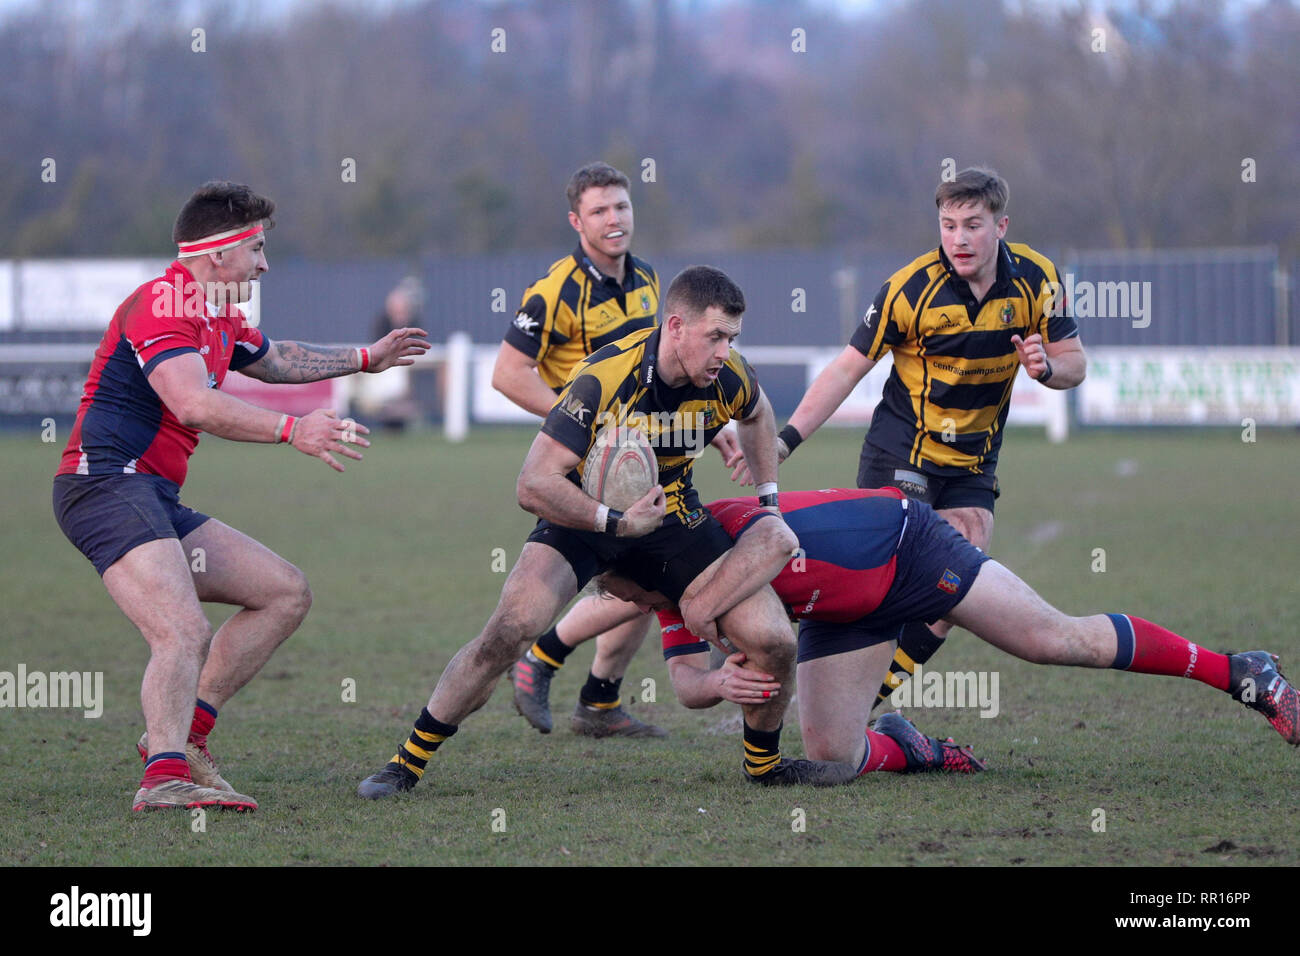 23.02.2019 Hinckley, Leicester, England. Rugby Union, Hinckley rfc v Chester rfc.  Mitch Lamb on the charge for Hinckley  during the RFU National Leag Stock Photo